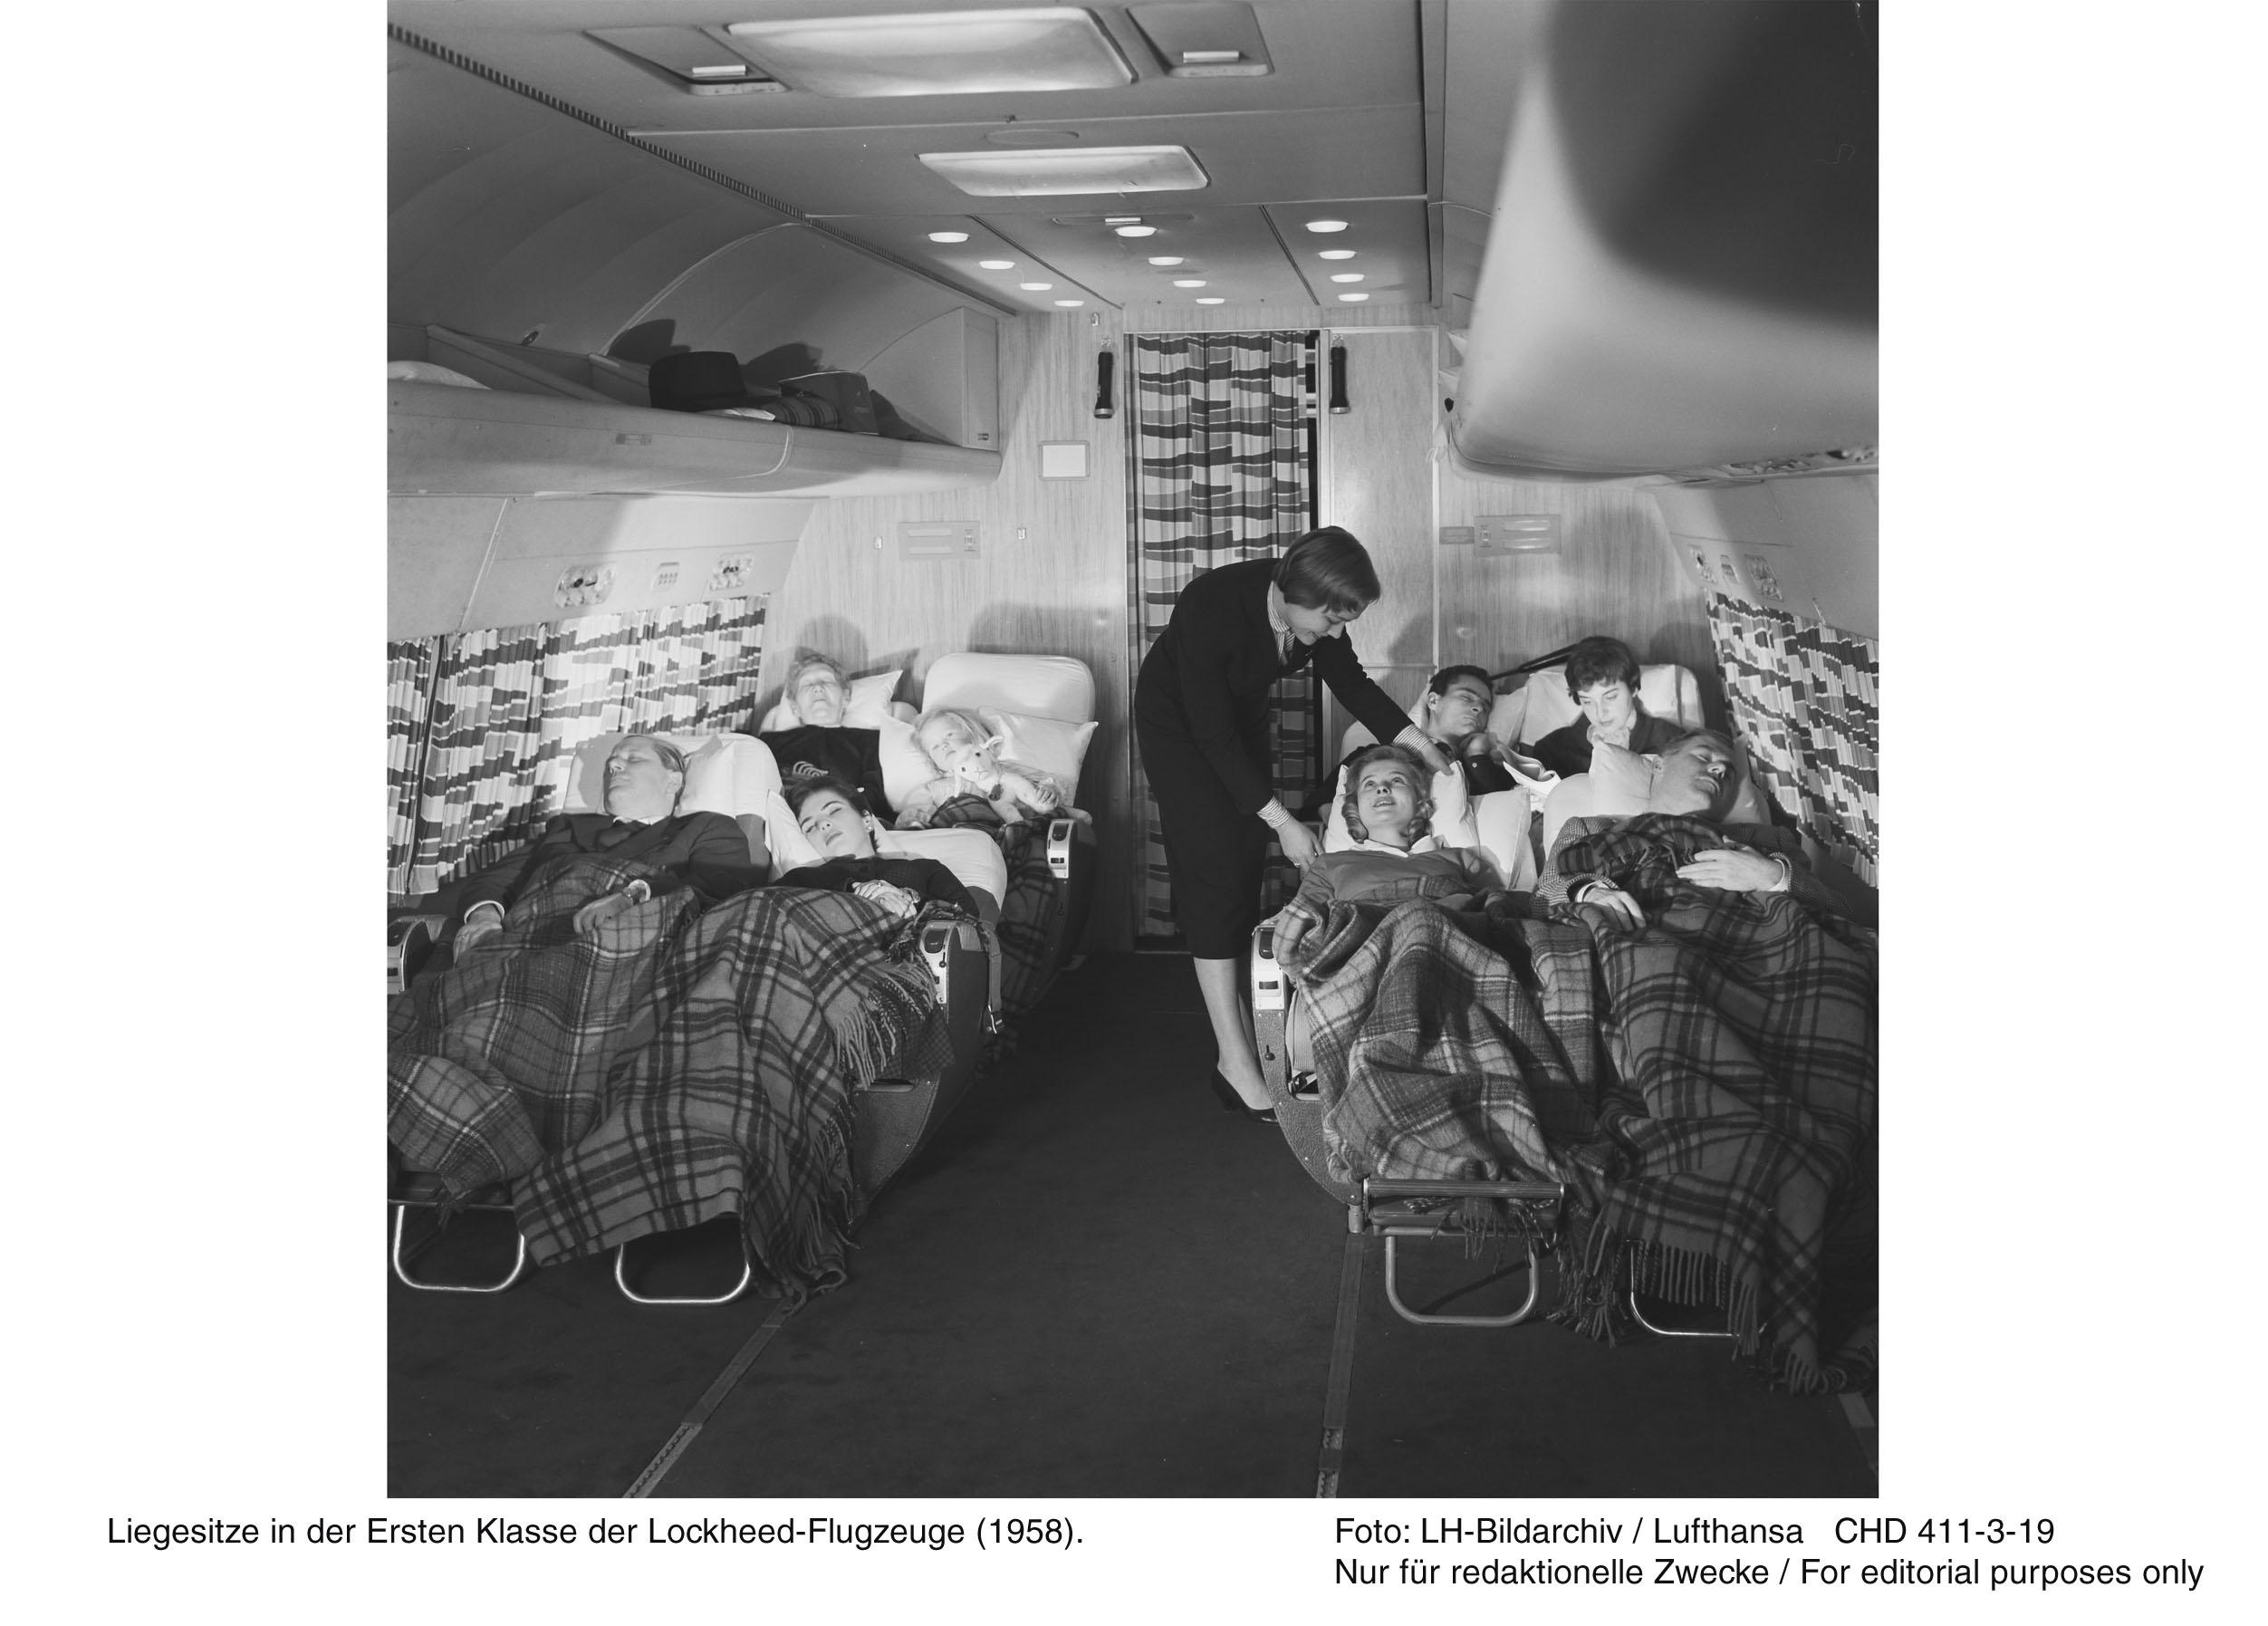 Another view of the 1st class cabin in a Lufthansa Lockheed L-1649A Super Star showing the reclining seats in action. (photo via Wolfgang Borgmann)